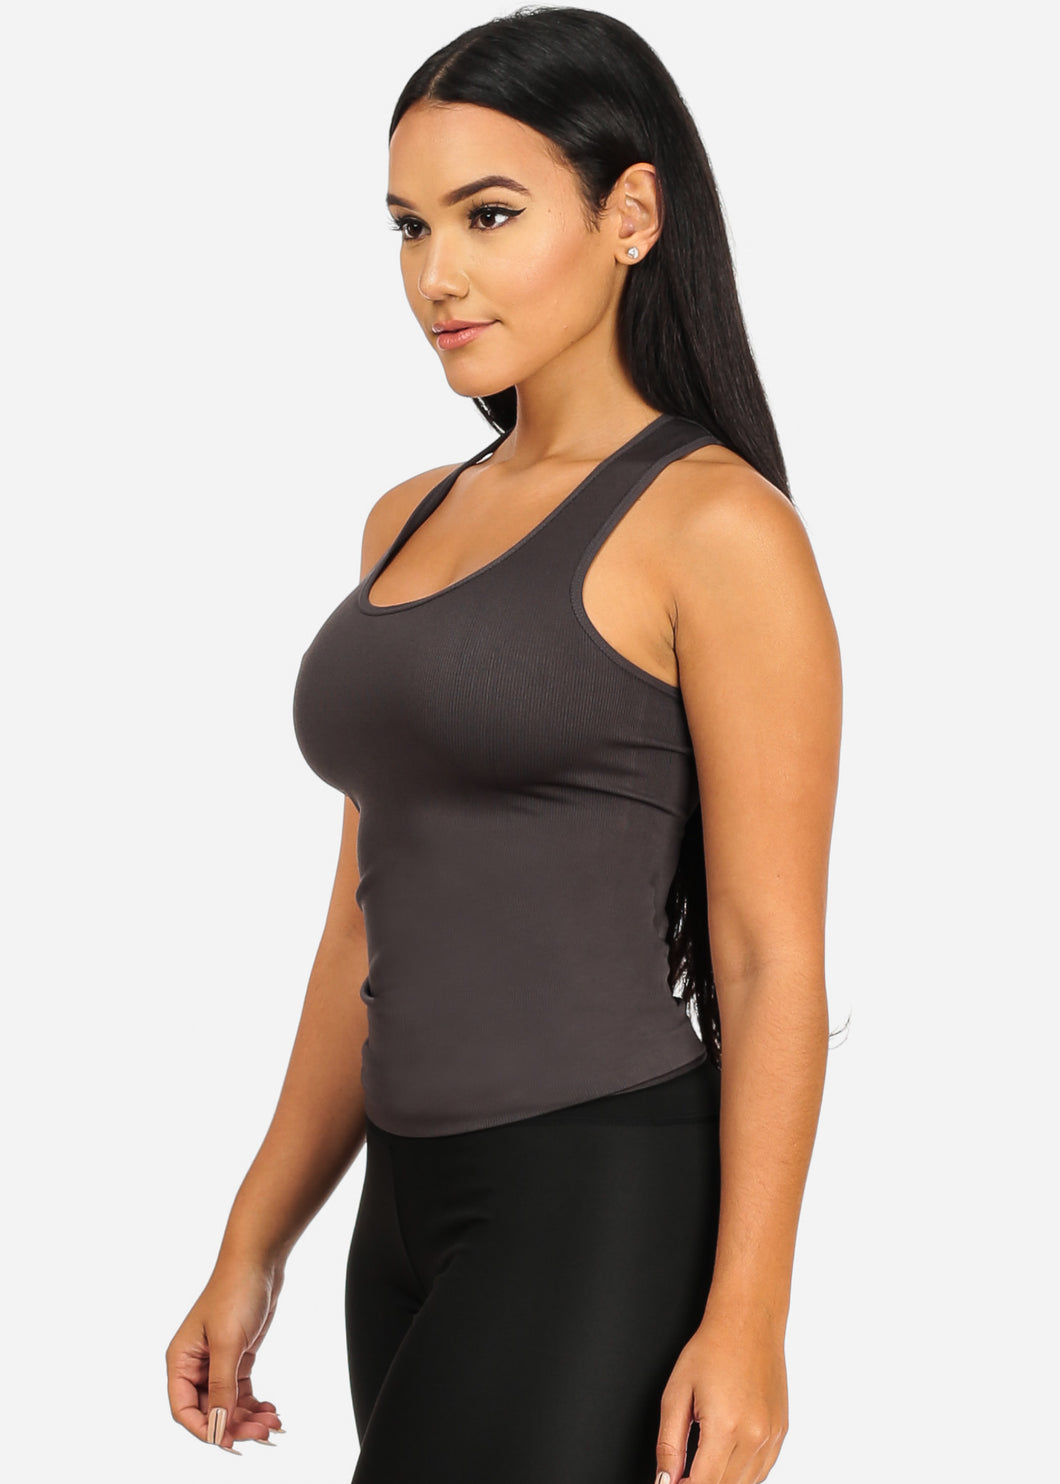 Spandex Women's Charcoal Color Tank Top CC-0531 – One Size Fits